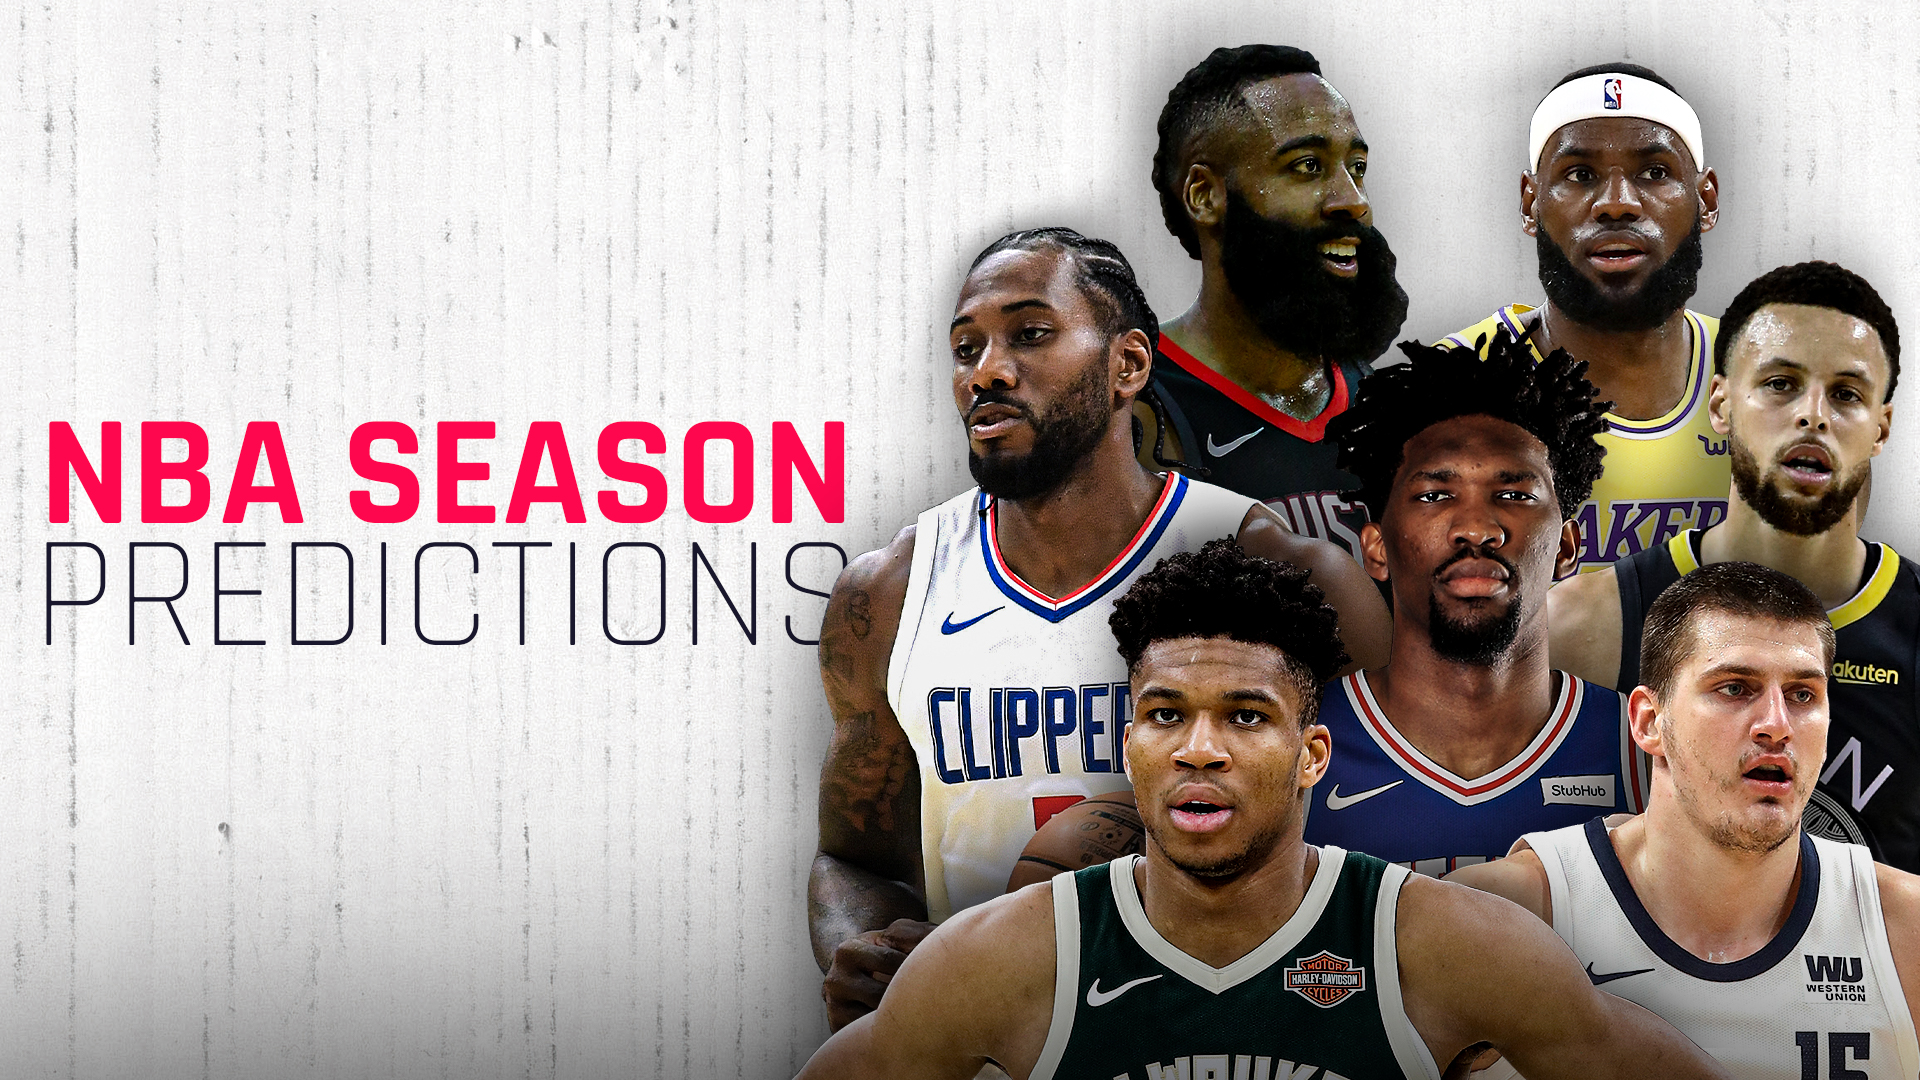 NBA predictions 201920 Final standings, playoff